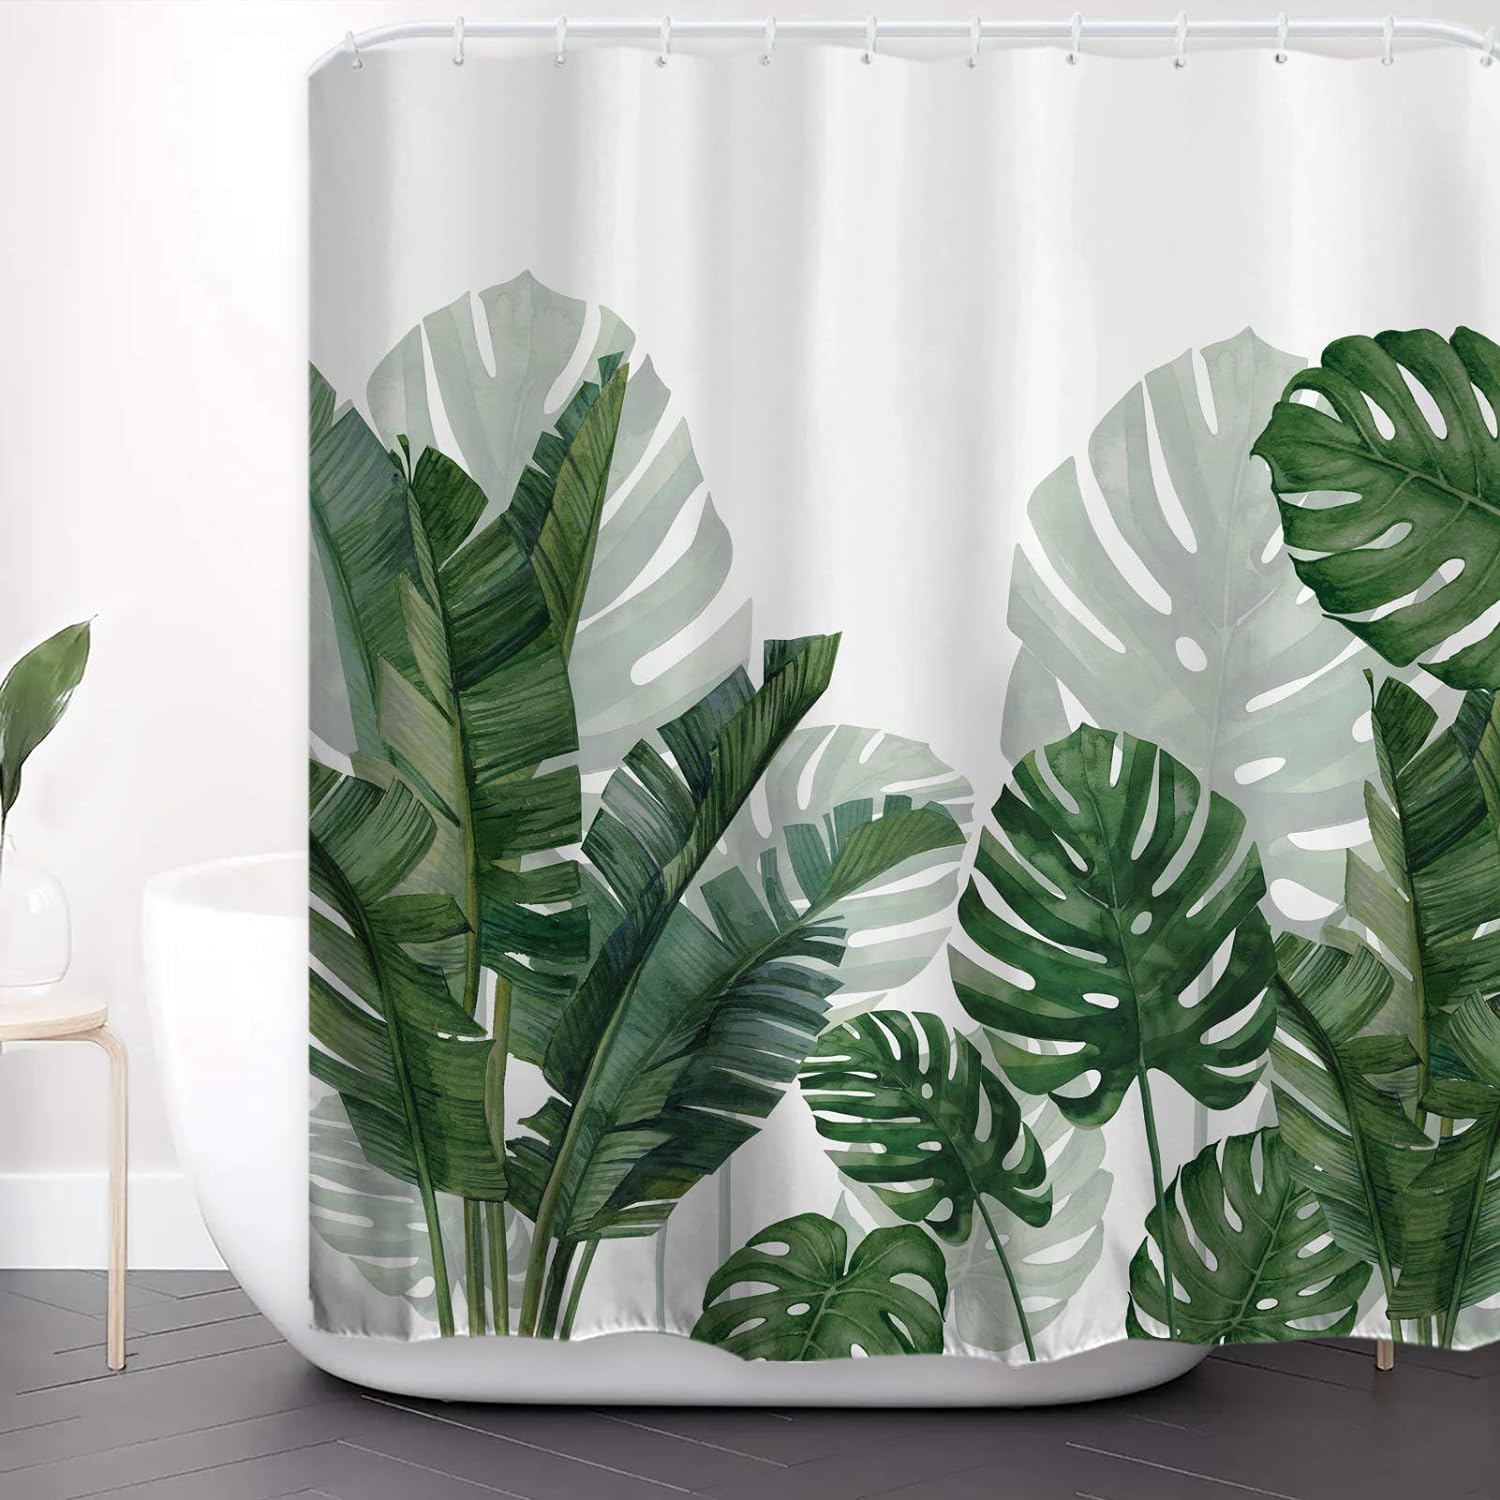 White Floral Palm Tree Leaves Shower Curtain Bathroom Mat Set Waterproof Fabric 